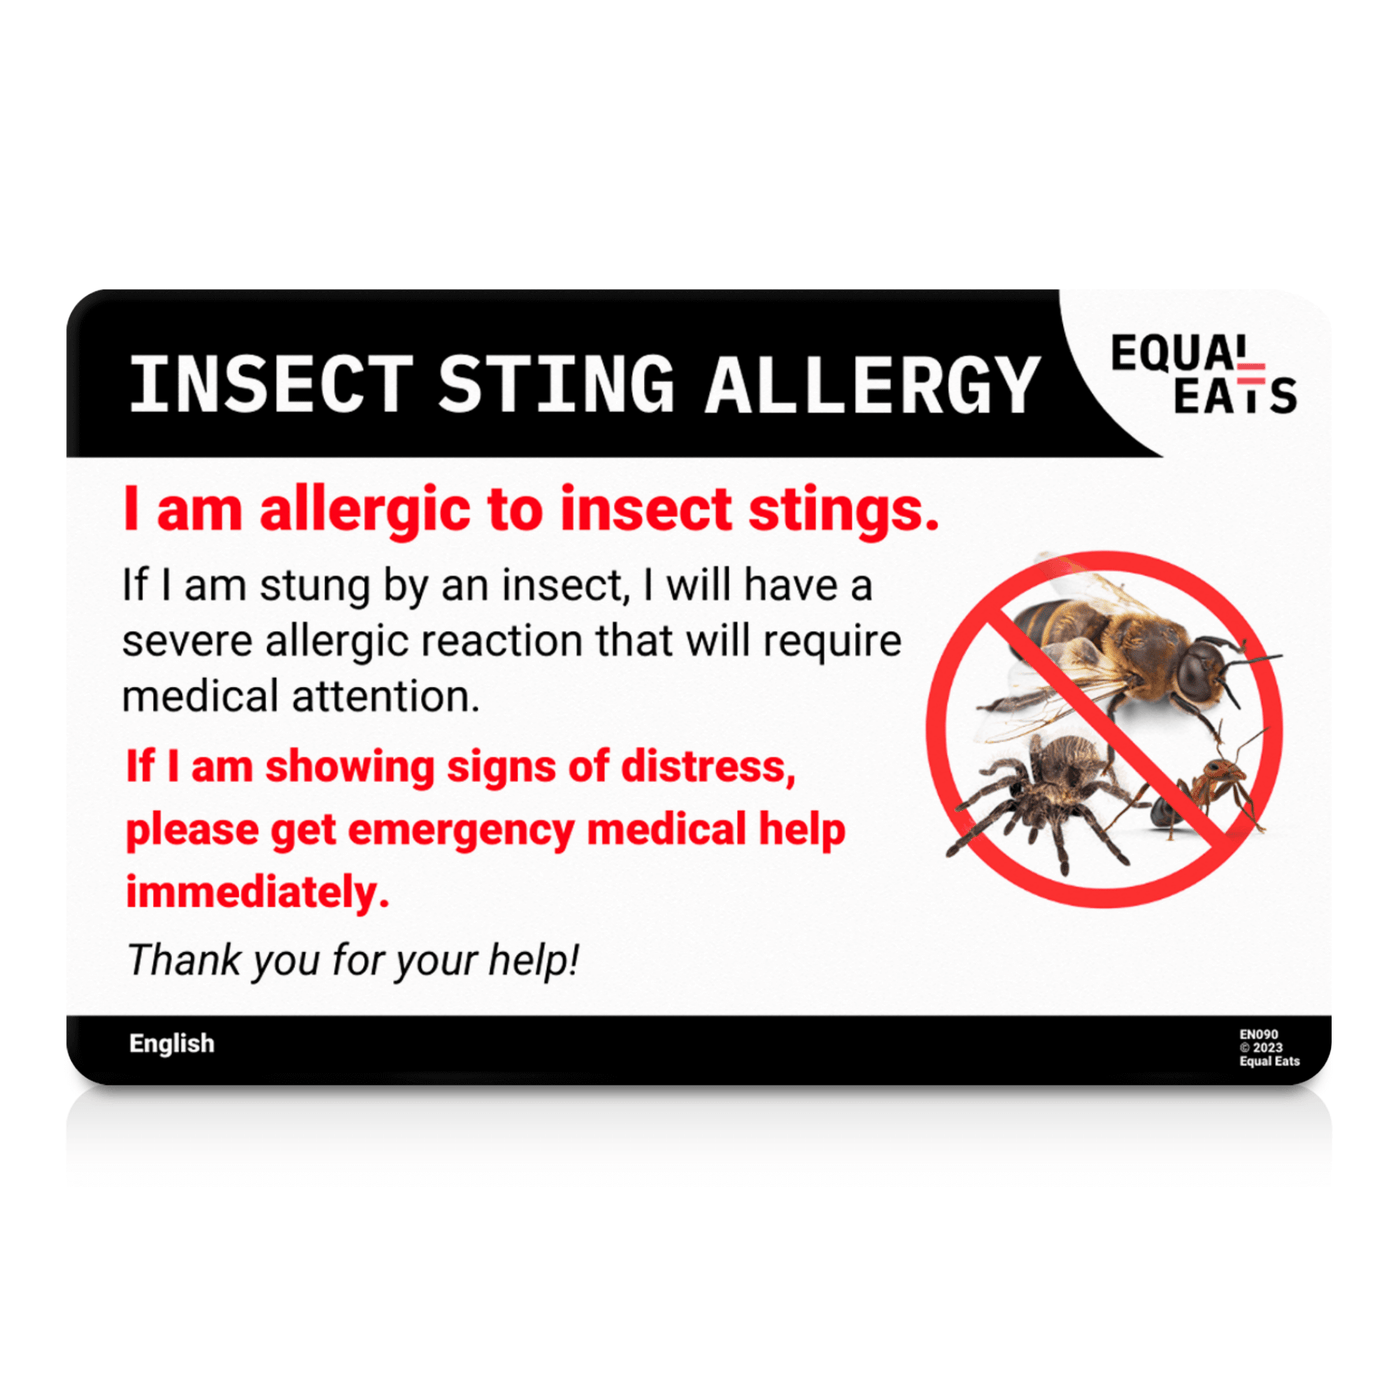 Insect Sting Allergy Card by Equal Eats, Bee Sting Allergy